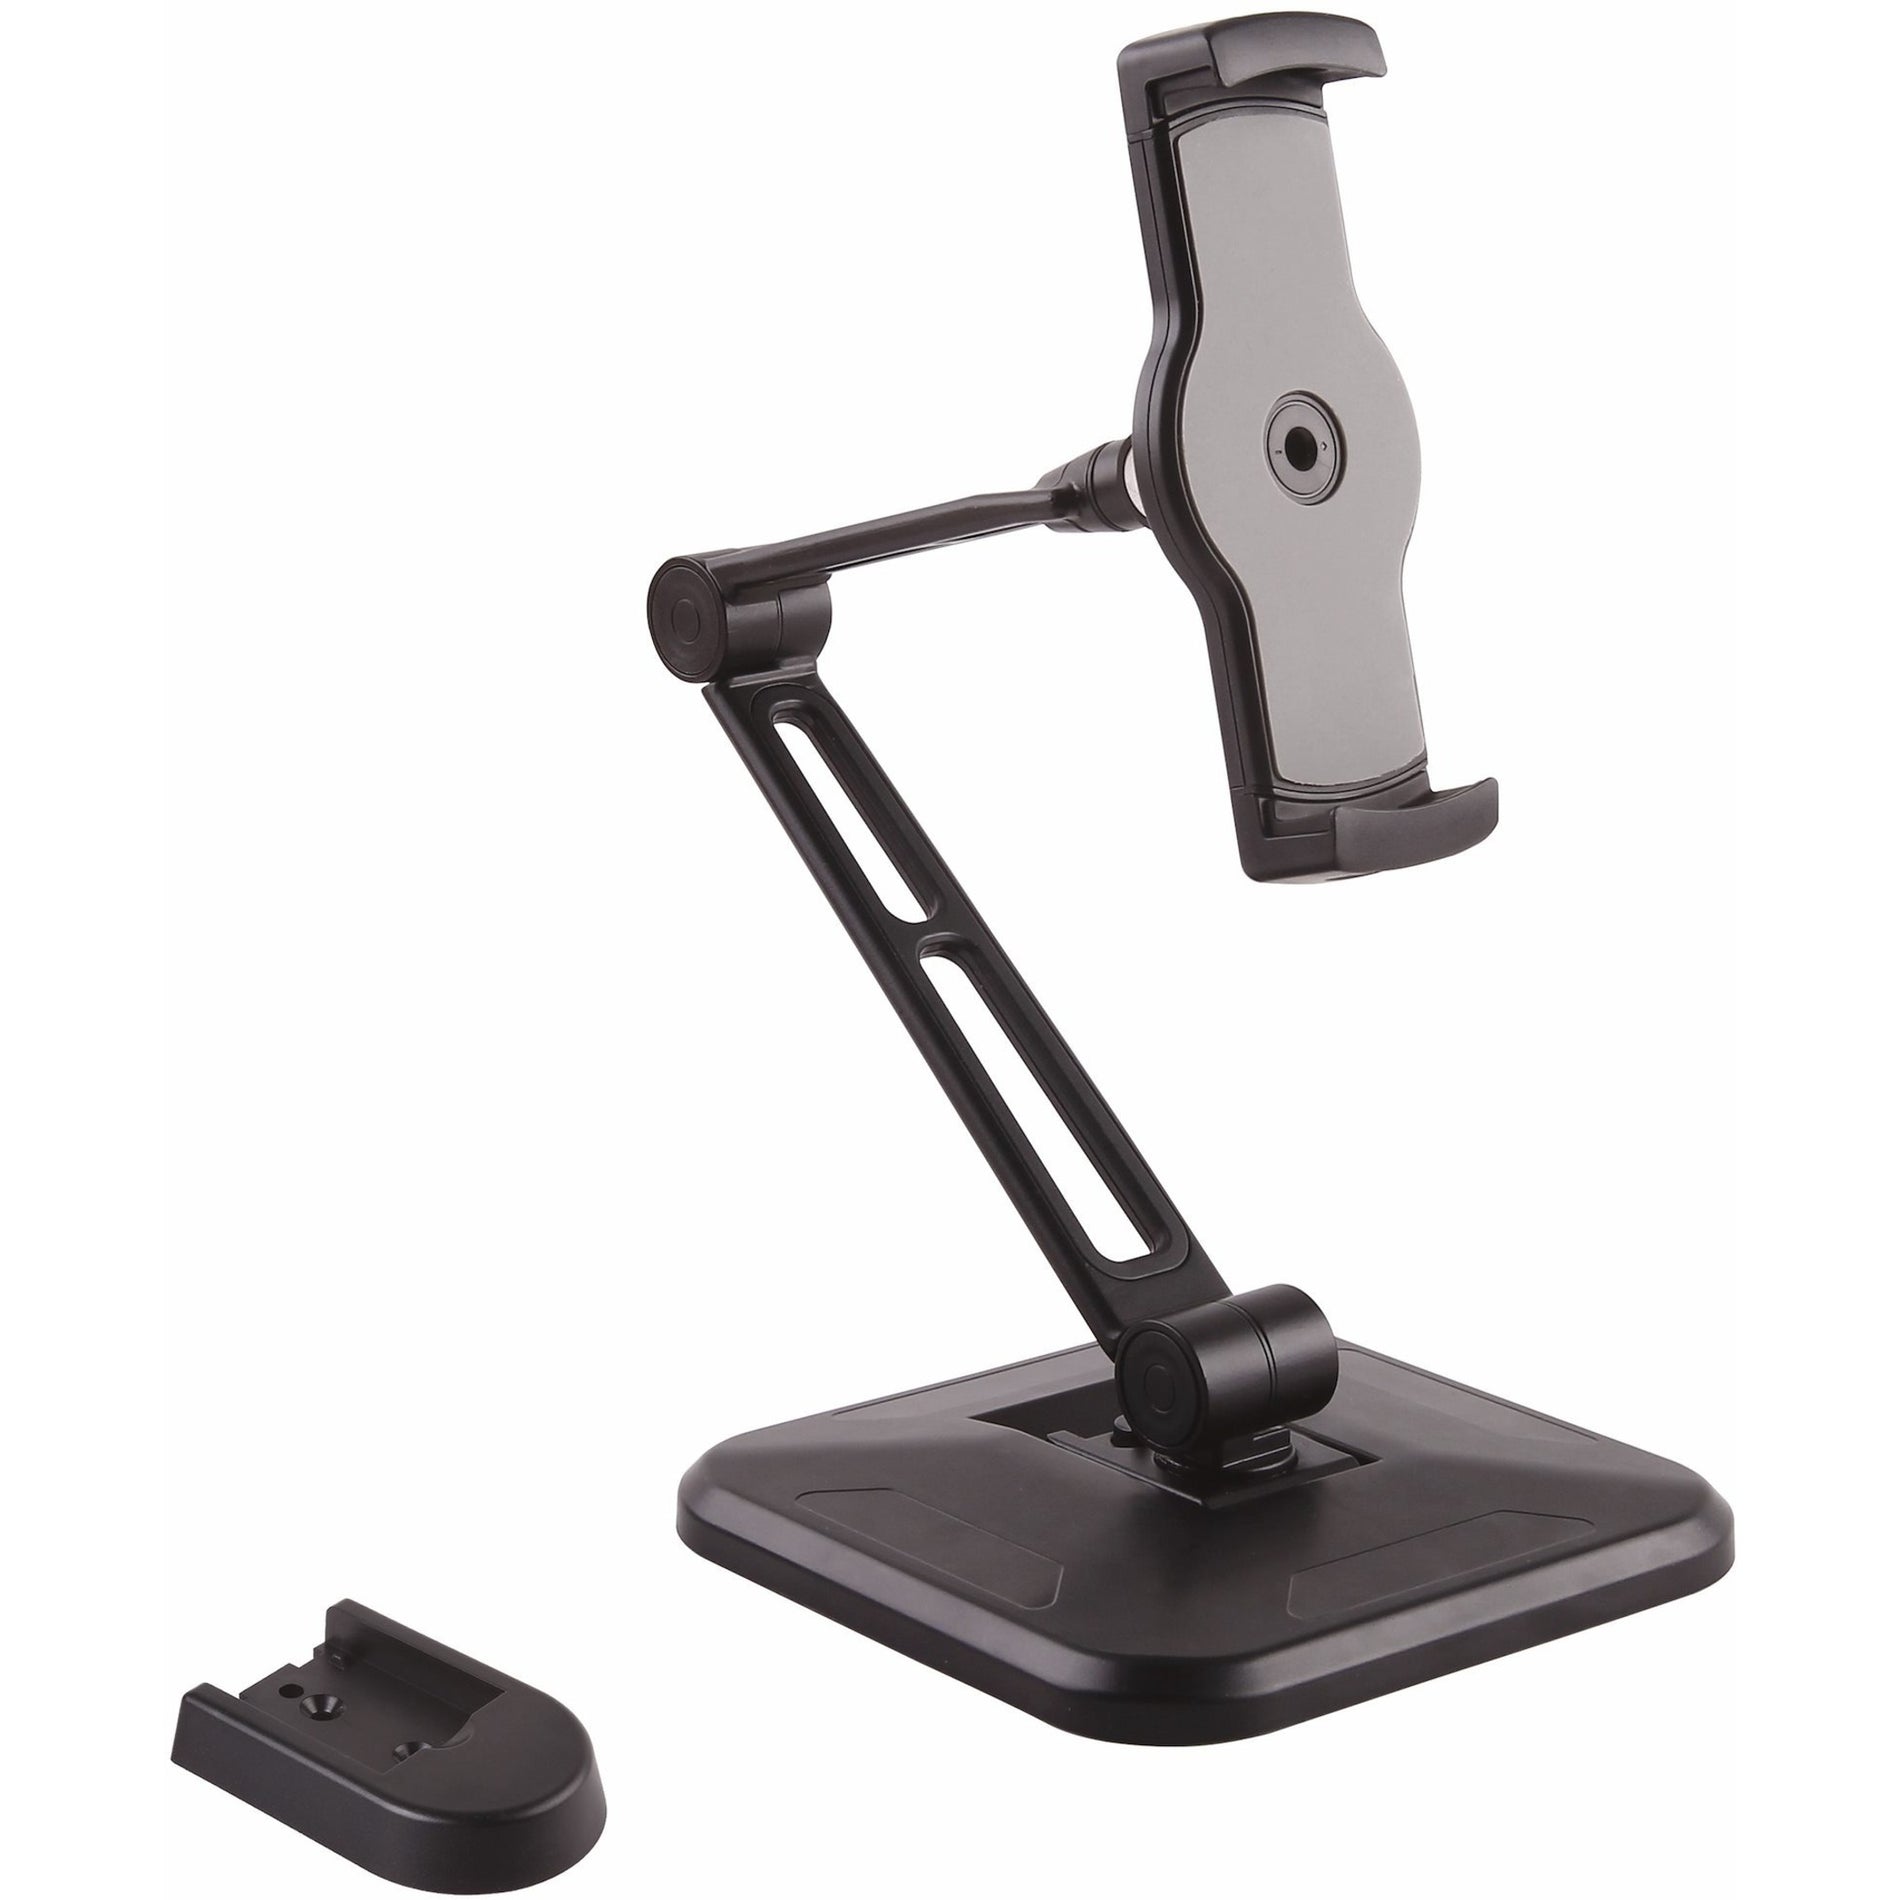 StarTech.com ARMTBLTDT Adjustable Tablet Stand with Arm - Wall-Mountable, Pivot, Rotate, 360° Rotation, Tablet and Smartphone Holder